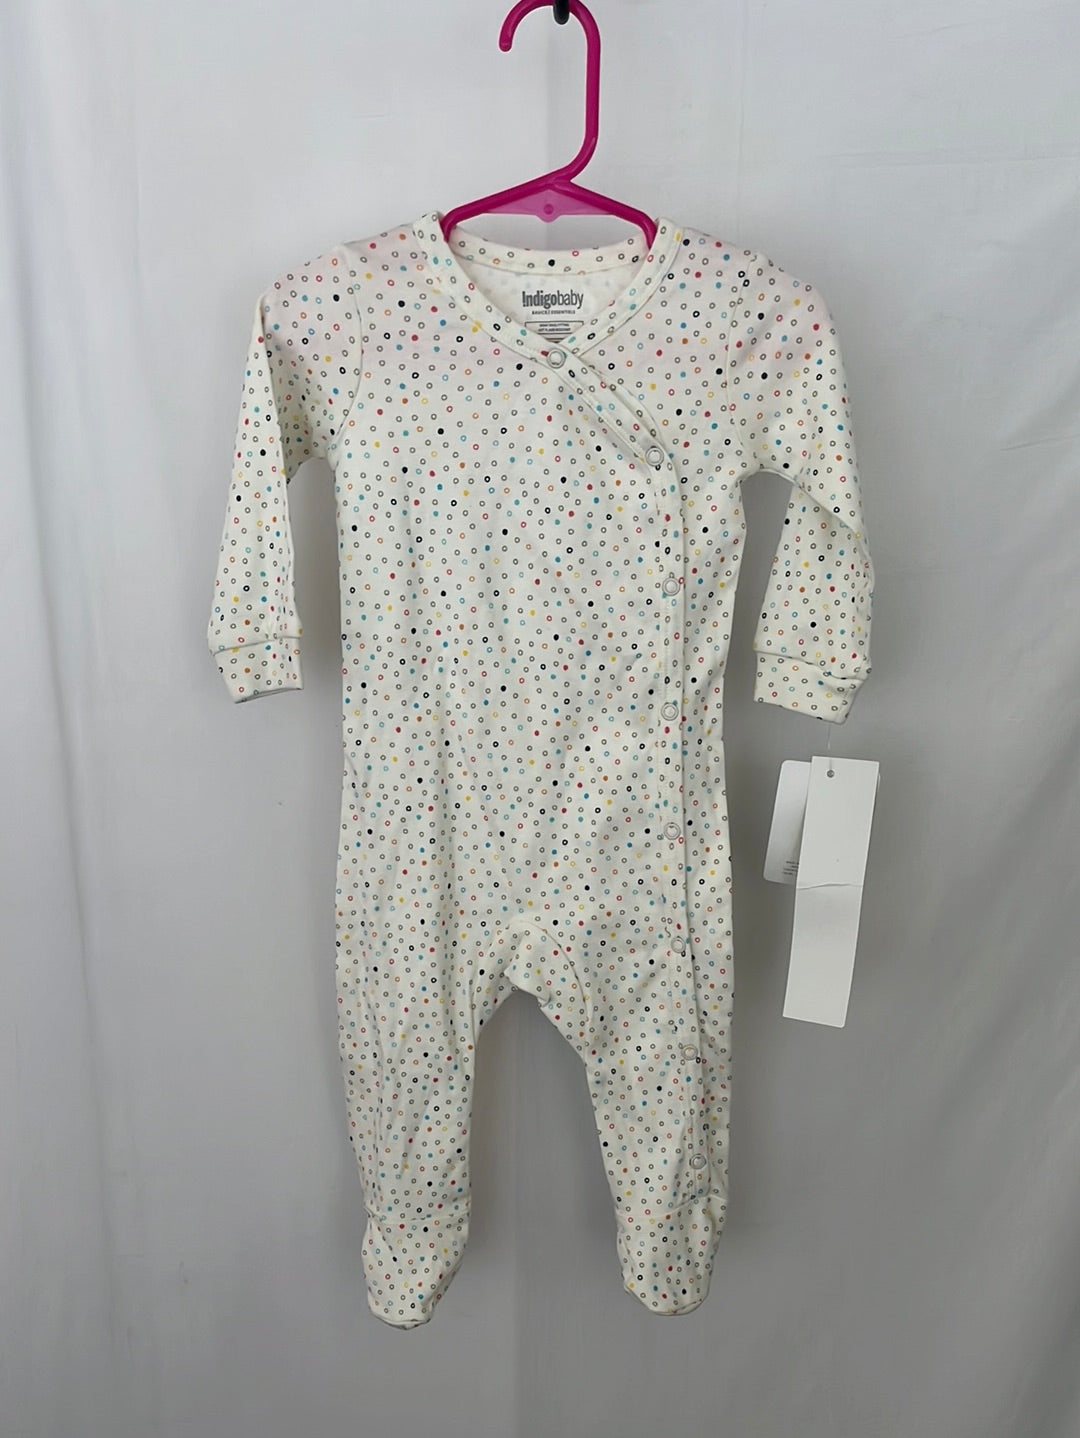 NWT -- INDIGO BABY White Multi-Colored Spots Footed Sleeper -- 6-12m